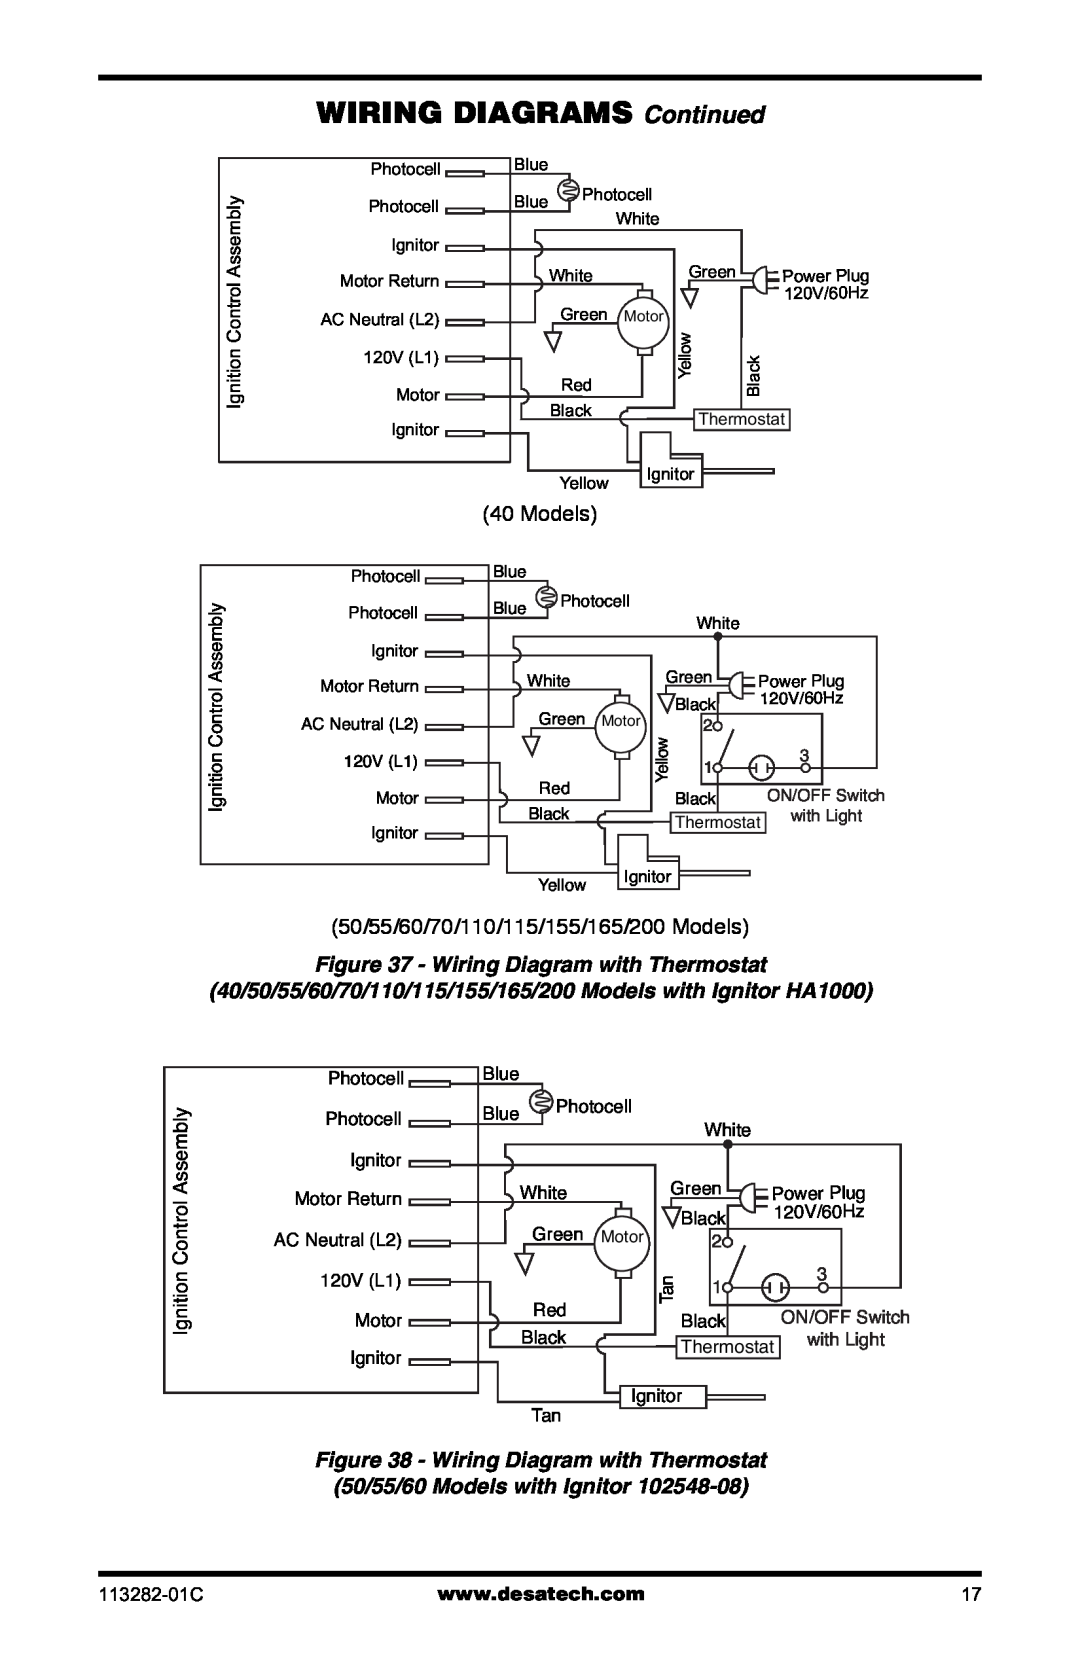 Desa BTU/HR owner manual WIRING DIAGRAMS Continued, Wiring Diagram with Thermostat 